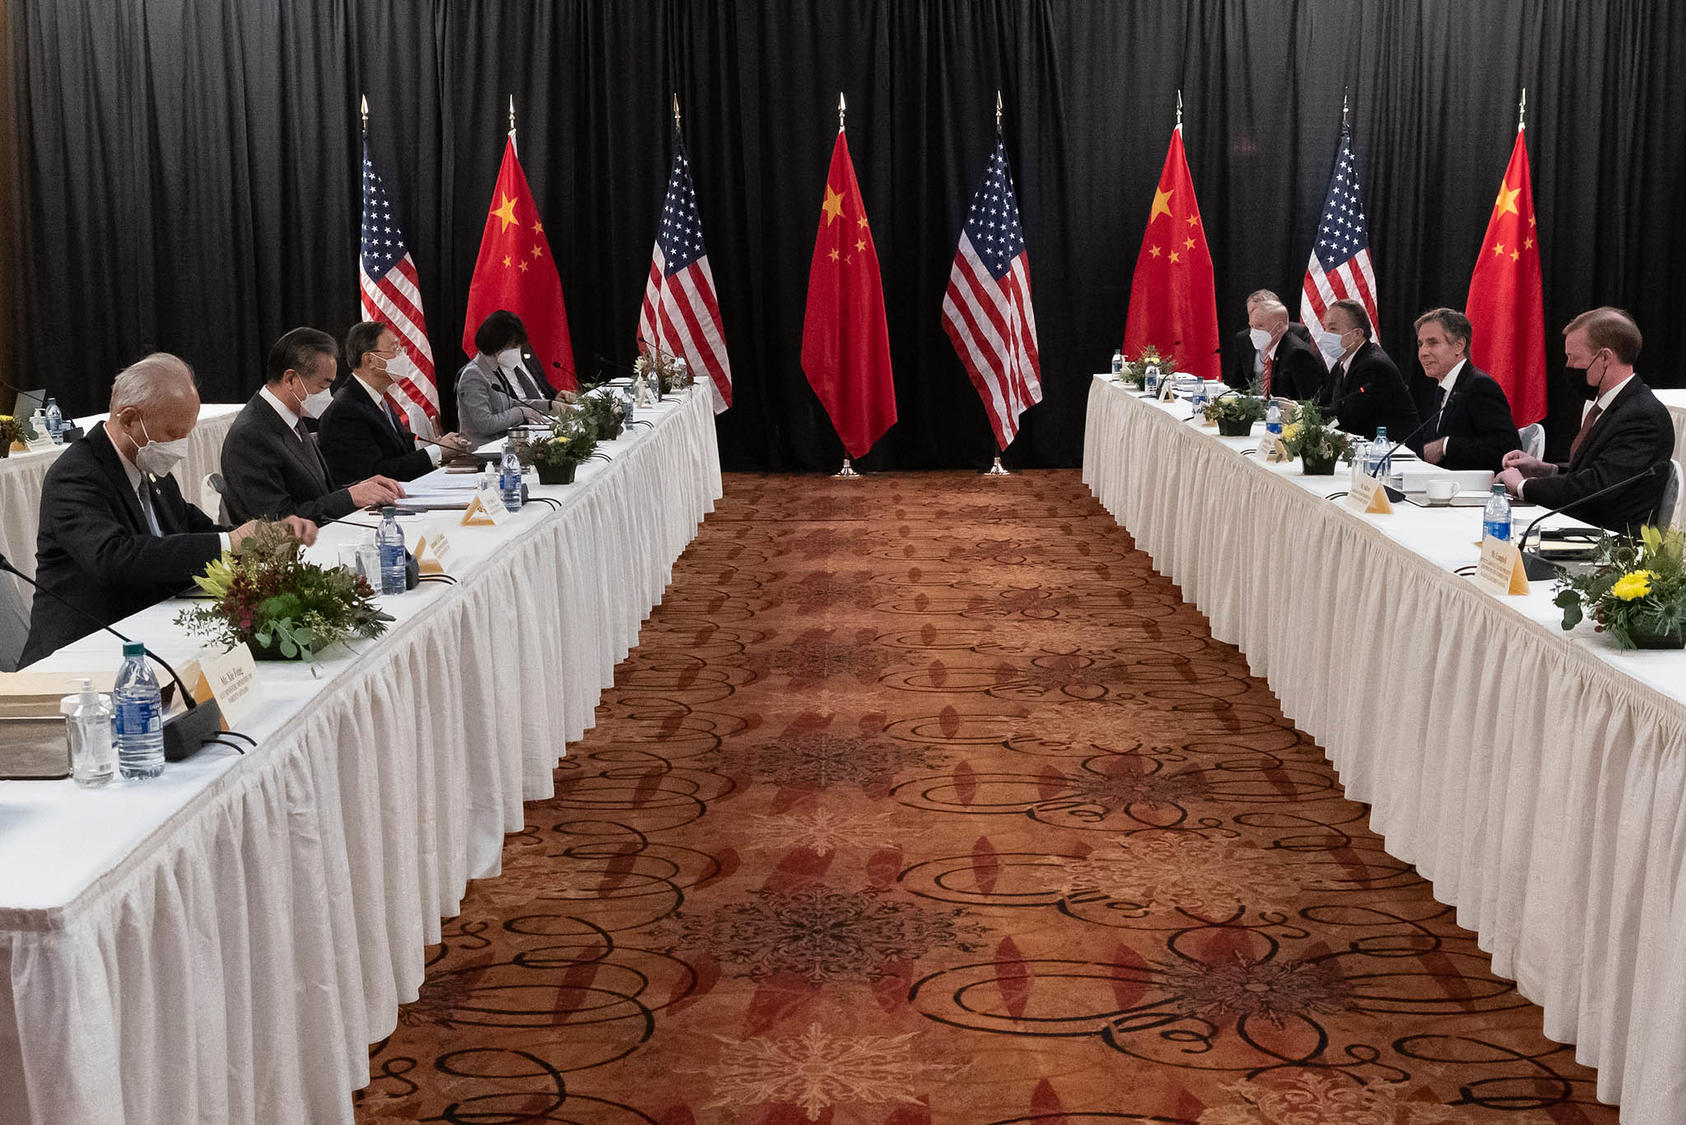 Secretary of State Antony J. Blinken and National Security Advisor Jake Sullivan meet with top Chinese diplomats in Anchorage, Alaska, March 18, 2021. (Ron Przysucha/U.S. State Department)